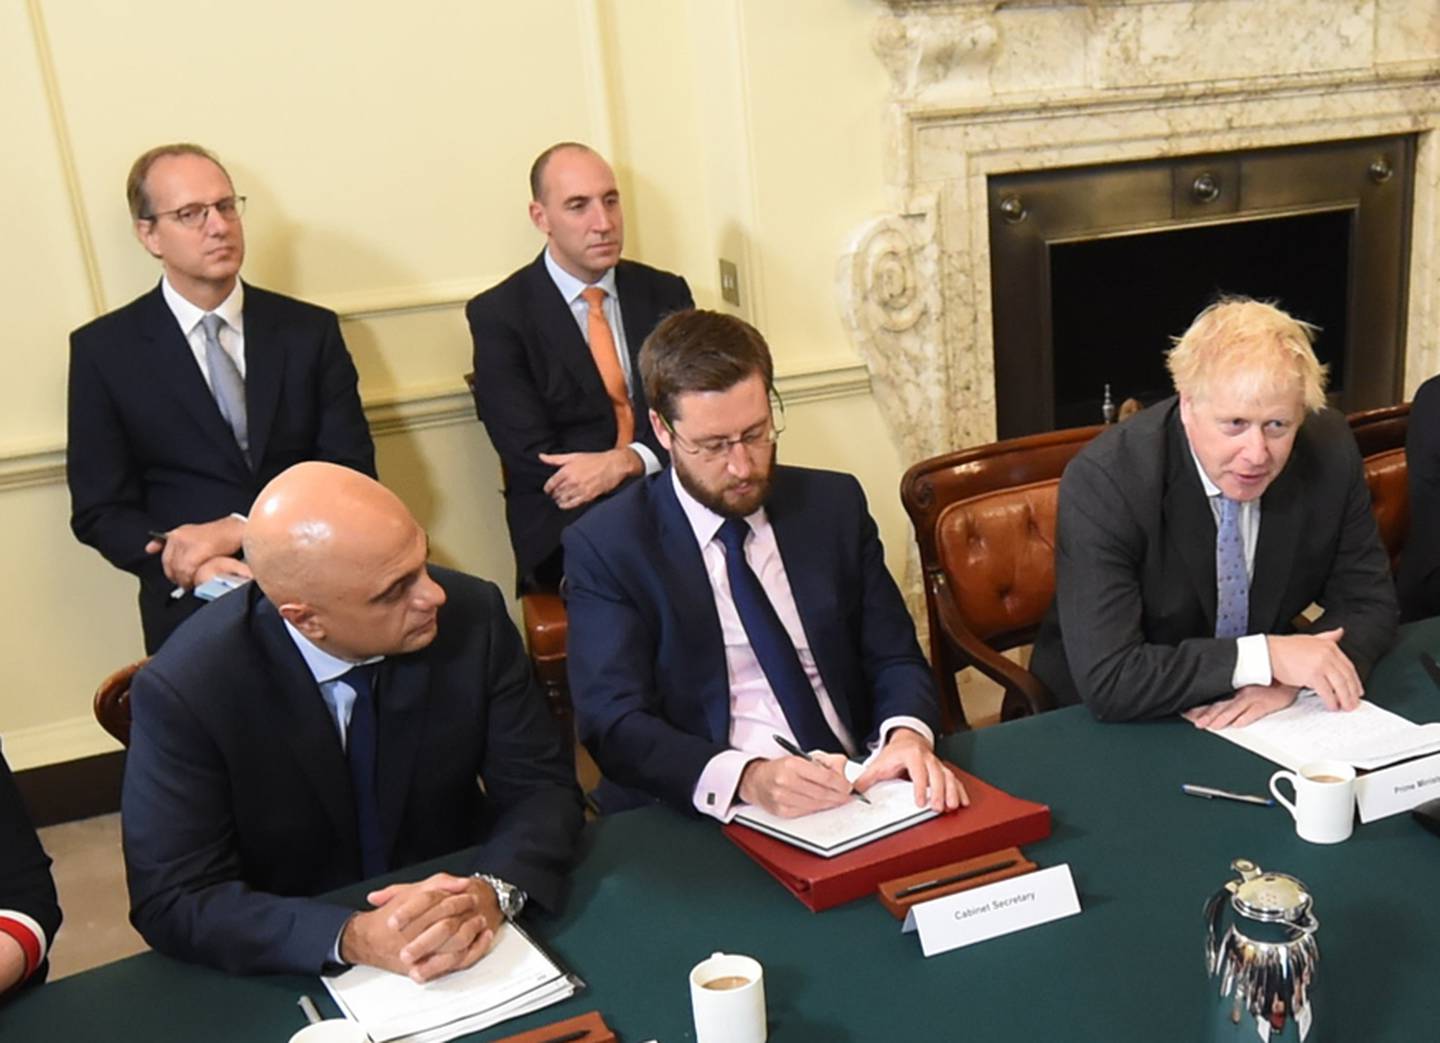 Martin Reynolds, rear left, the prime minister's principal private secretary, at a Cabinet meeting led by Boris Johnson. Mr Reynolds is alleged to have organised a 'bring your own booze' party for Downing Street staff during the first national lockdown in May 2020. PA